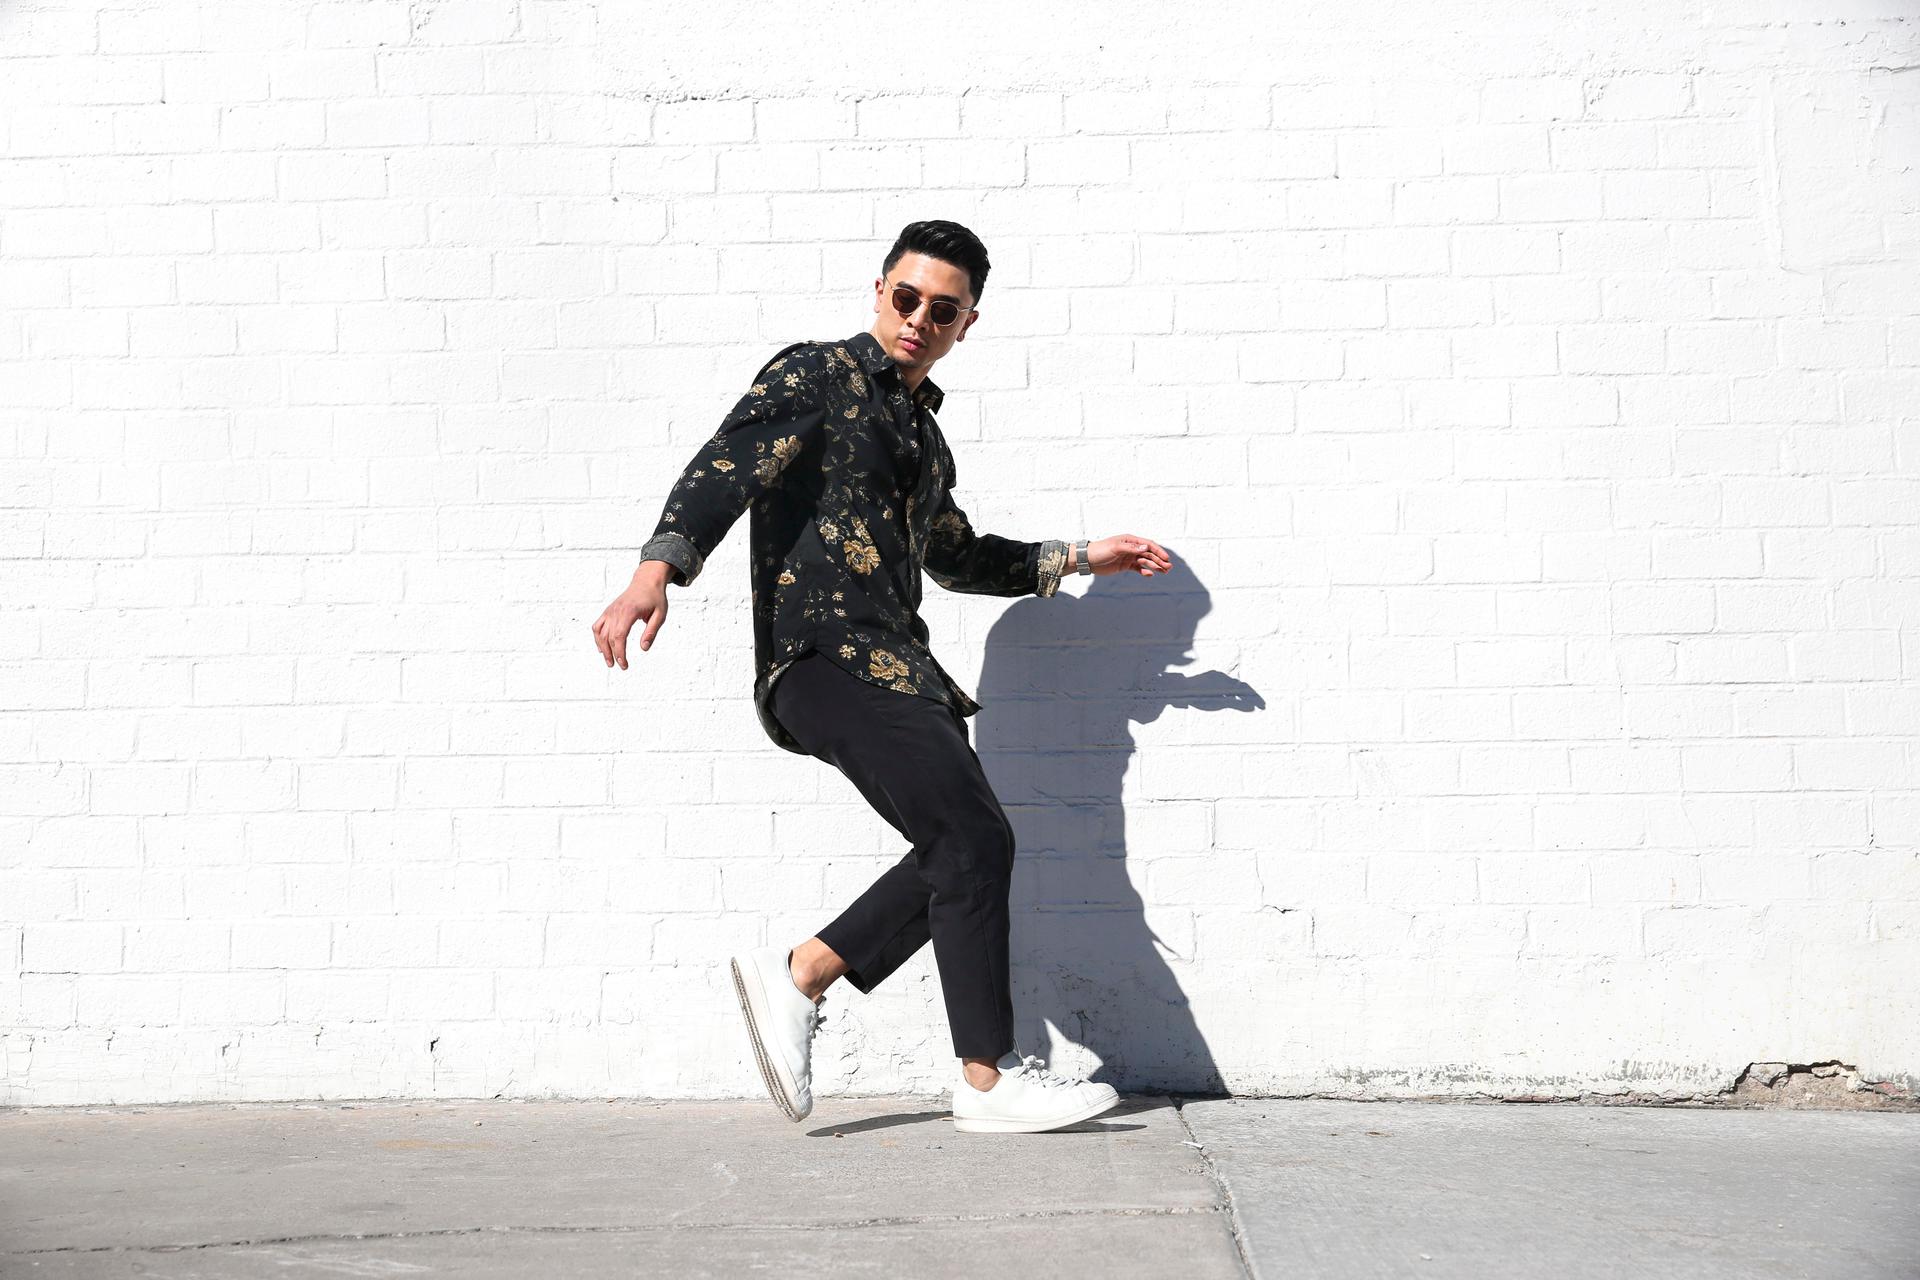 Man in sunglasses in dance pose in front of white, brick wall